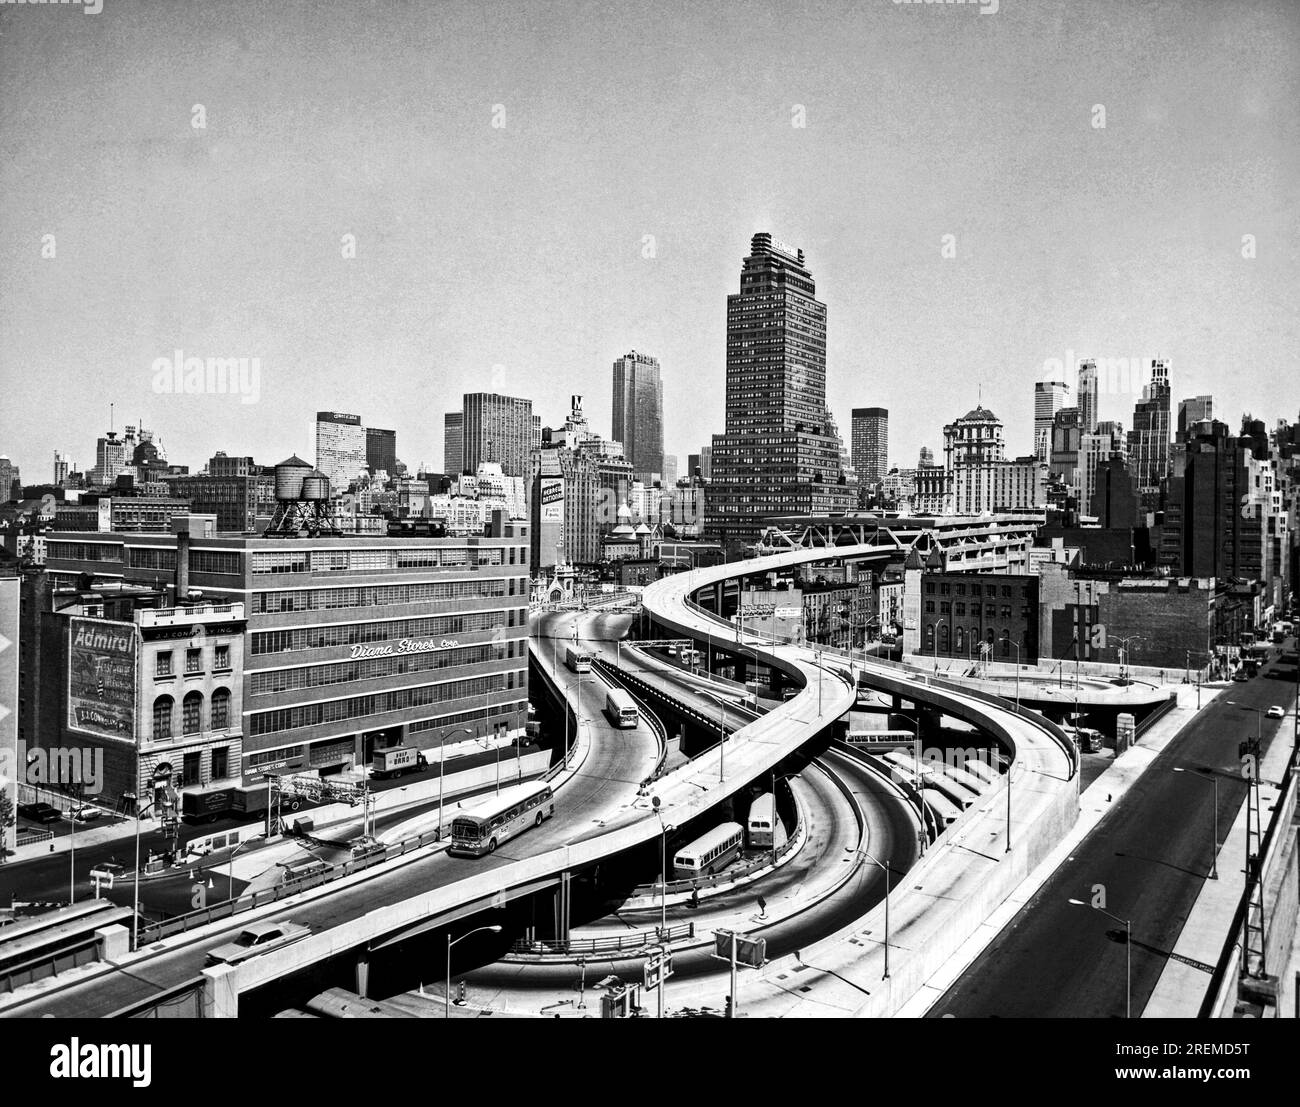 New York, New York:  May, 1963. The Port Authority Bus Terminal showing the ramps by the Diana Stores Building. Stock Photo